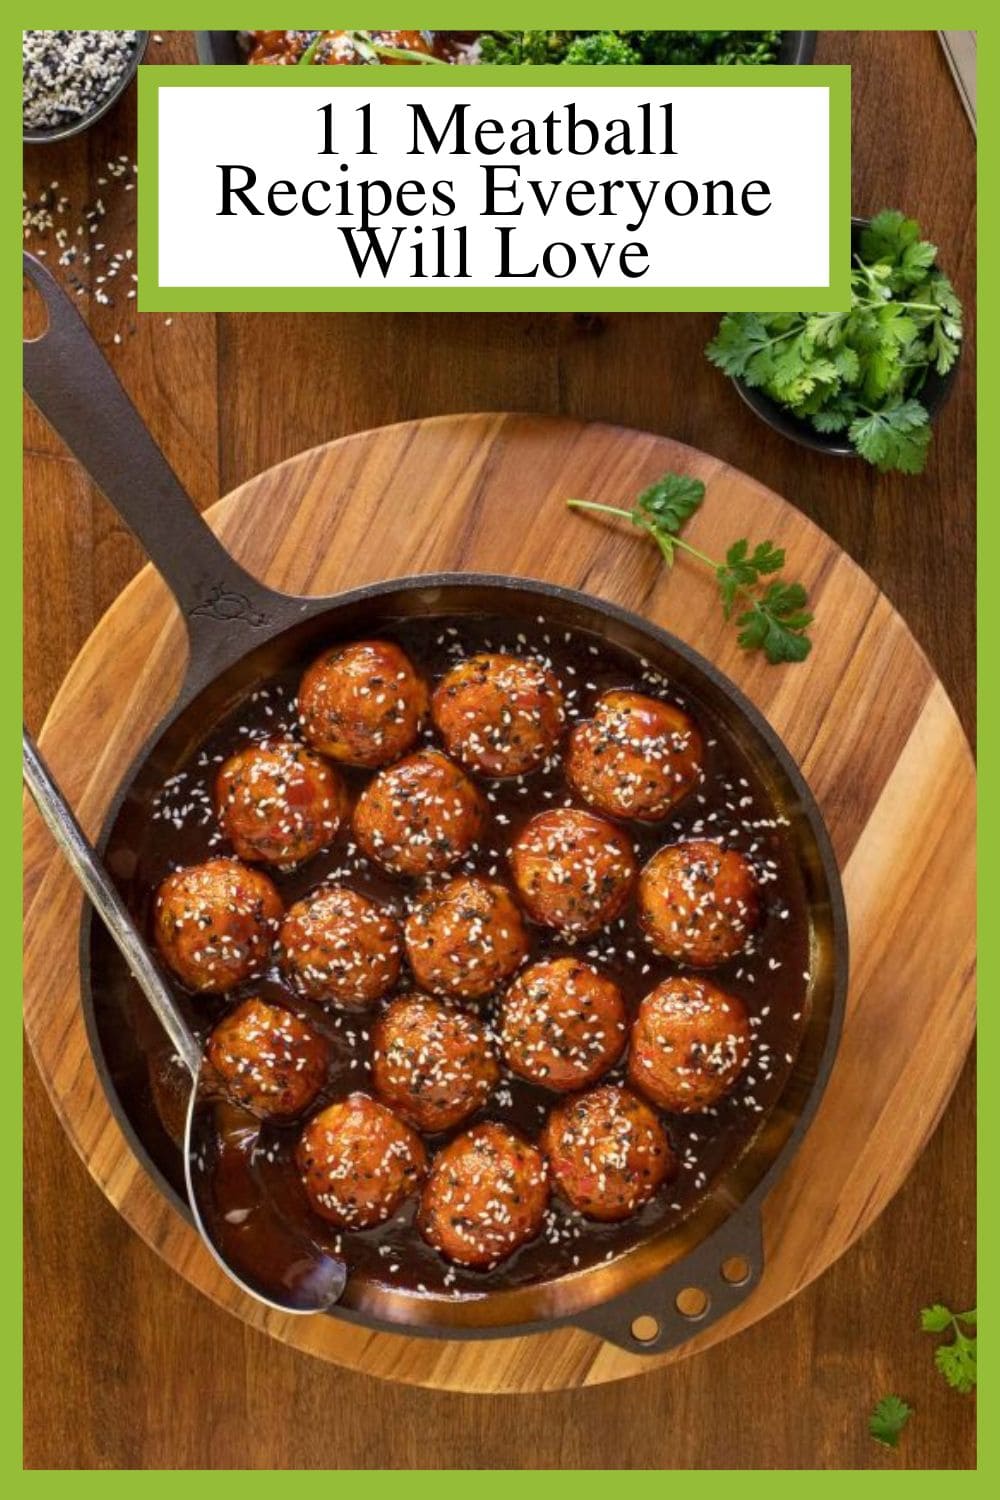 Meatballs From Around the Globe - 11 Easy Recipes!